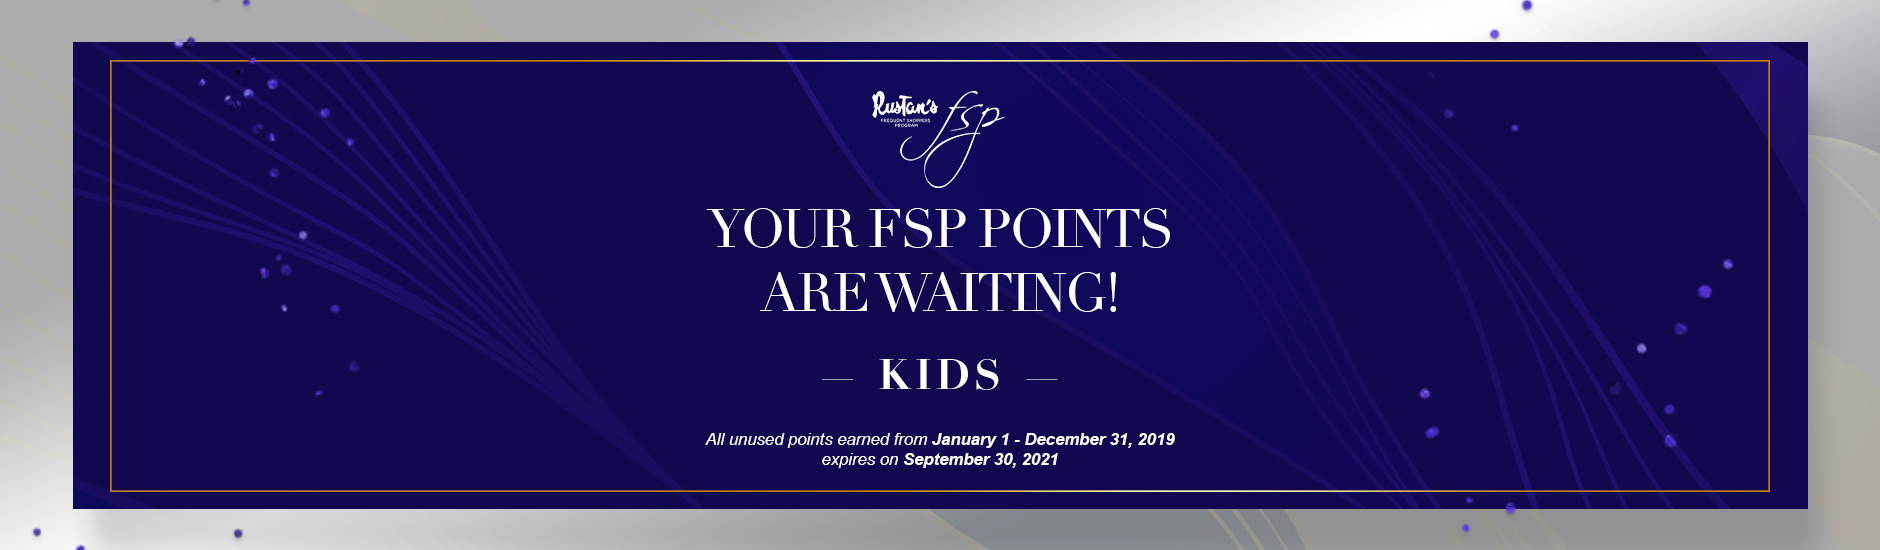 Your FSP Points are Waiting this September: Kids